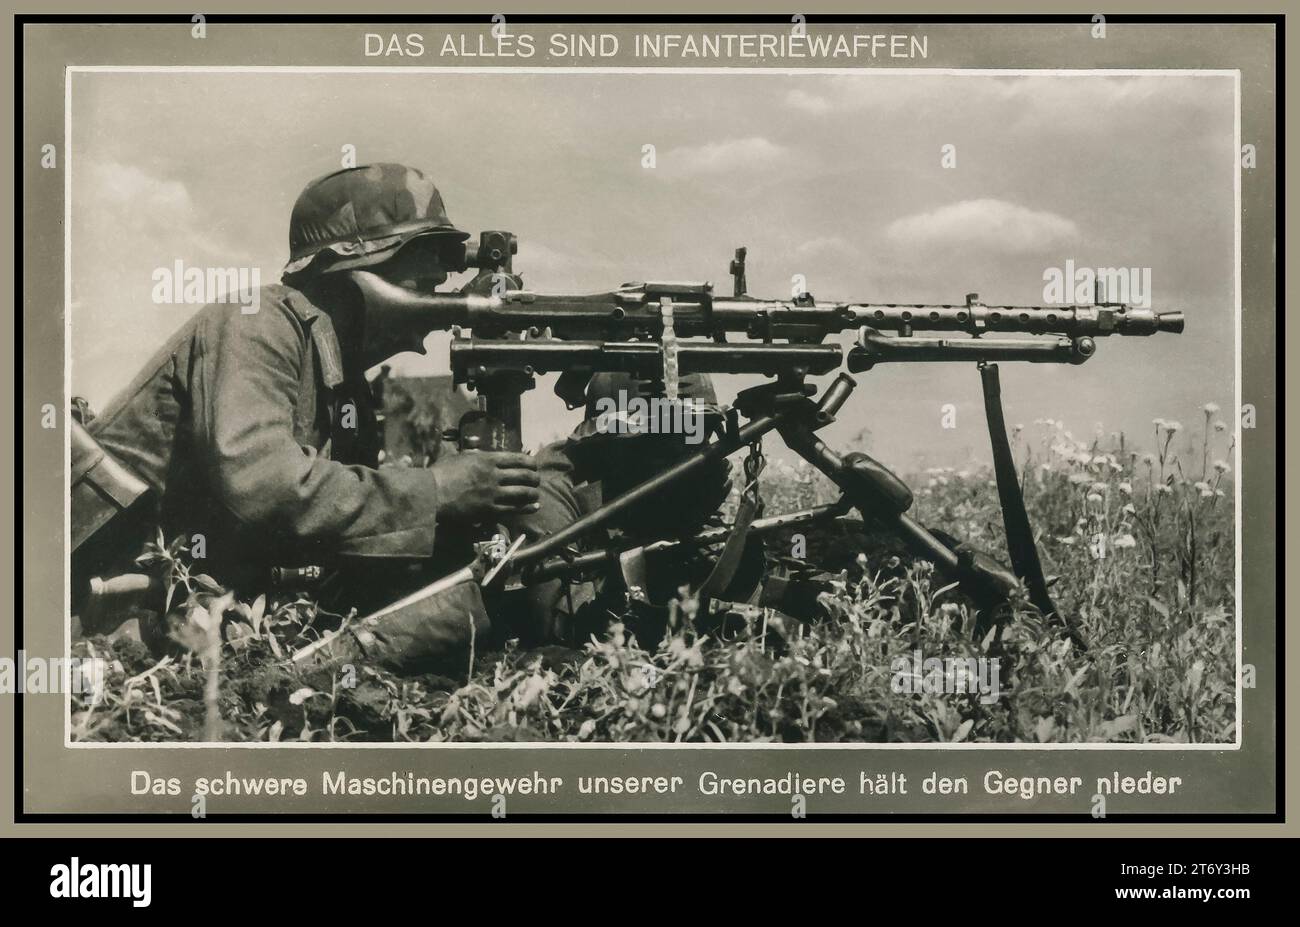 WW2 Propaganda Nazi MG-42 Machine Gun World War II Image of Wehrmacht Army Nazi soldier in battlefield  with MG-42 Machine Gun with optical sight, caption reads  'These are all infantry weapons' ''The heavy machine gun of our Grenadiers keeps the enemy down'' Stock Photo